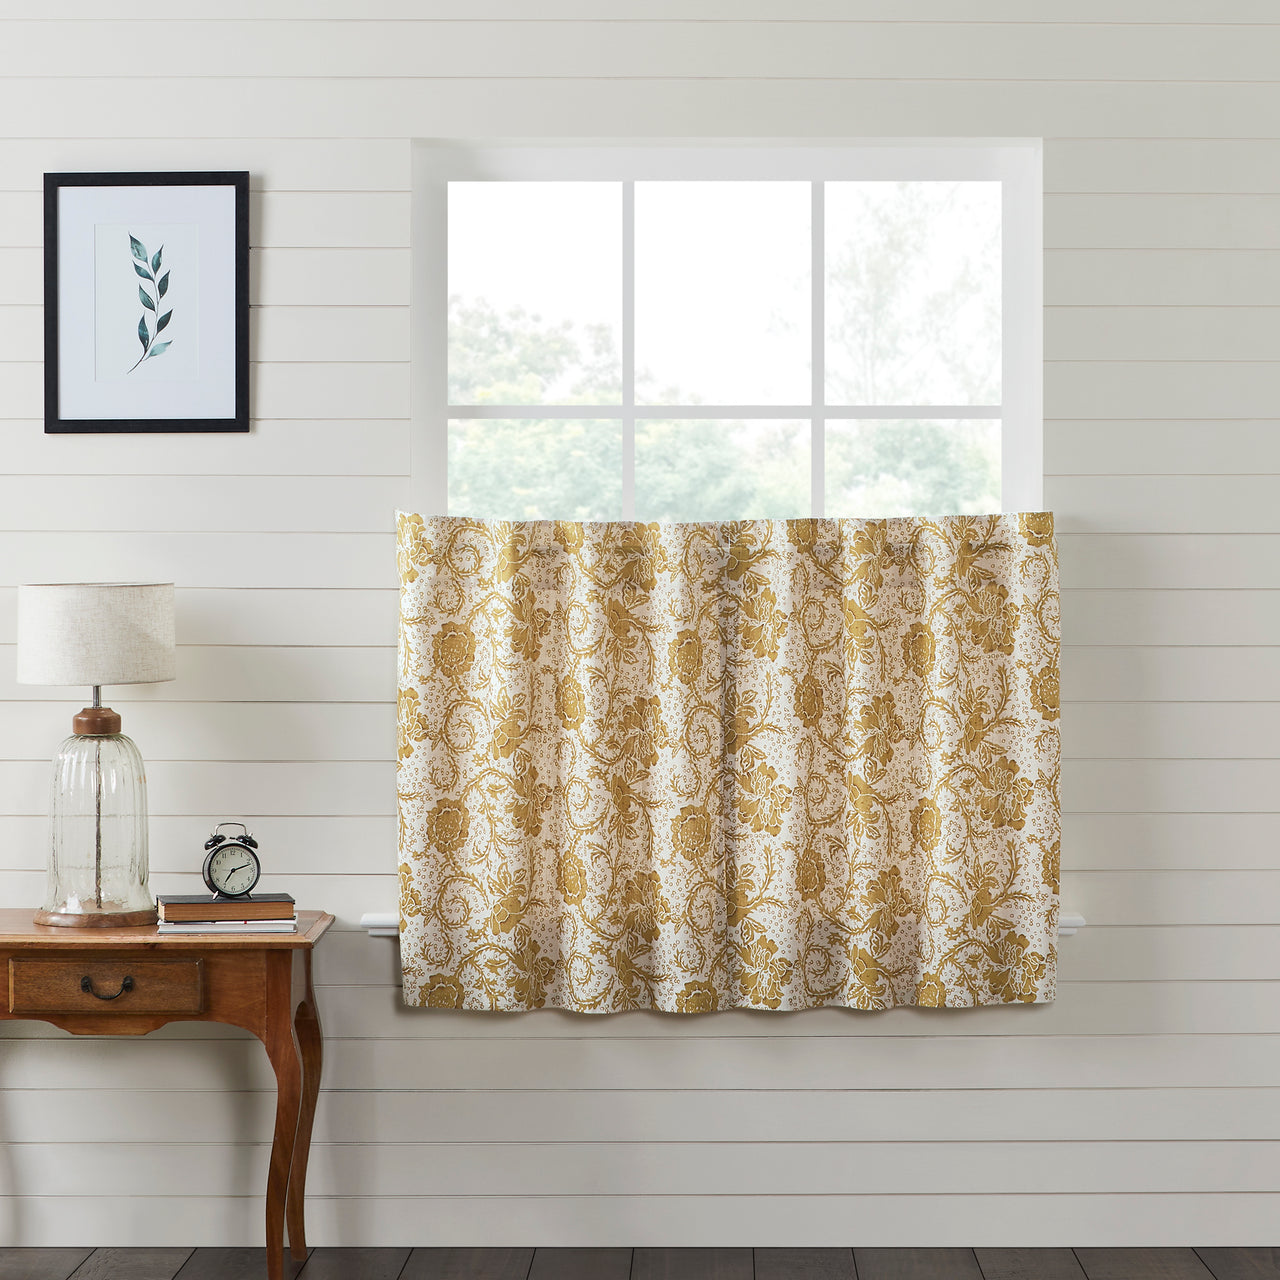 Dorset Gold Floral Tier Curtain Set of 2 L36xW36 VHC Brands